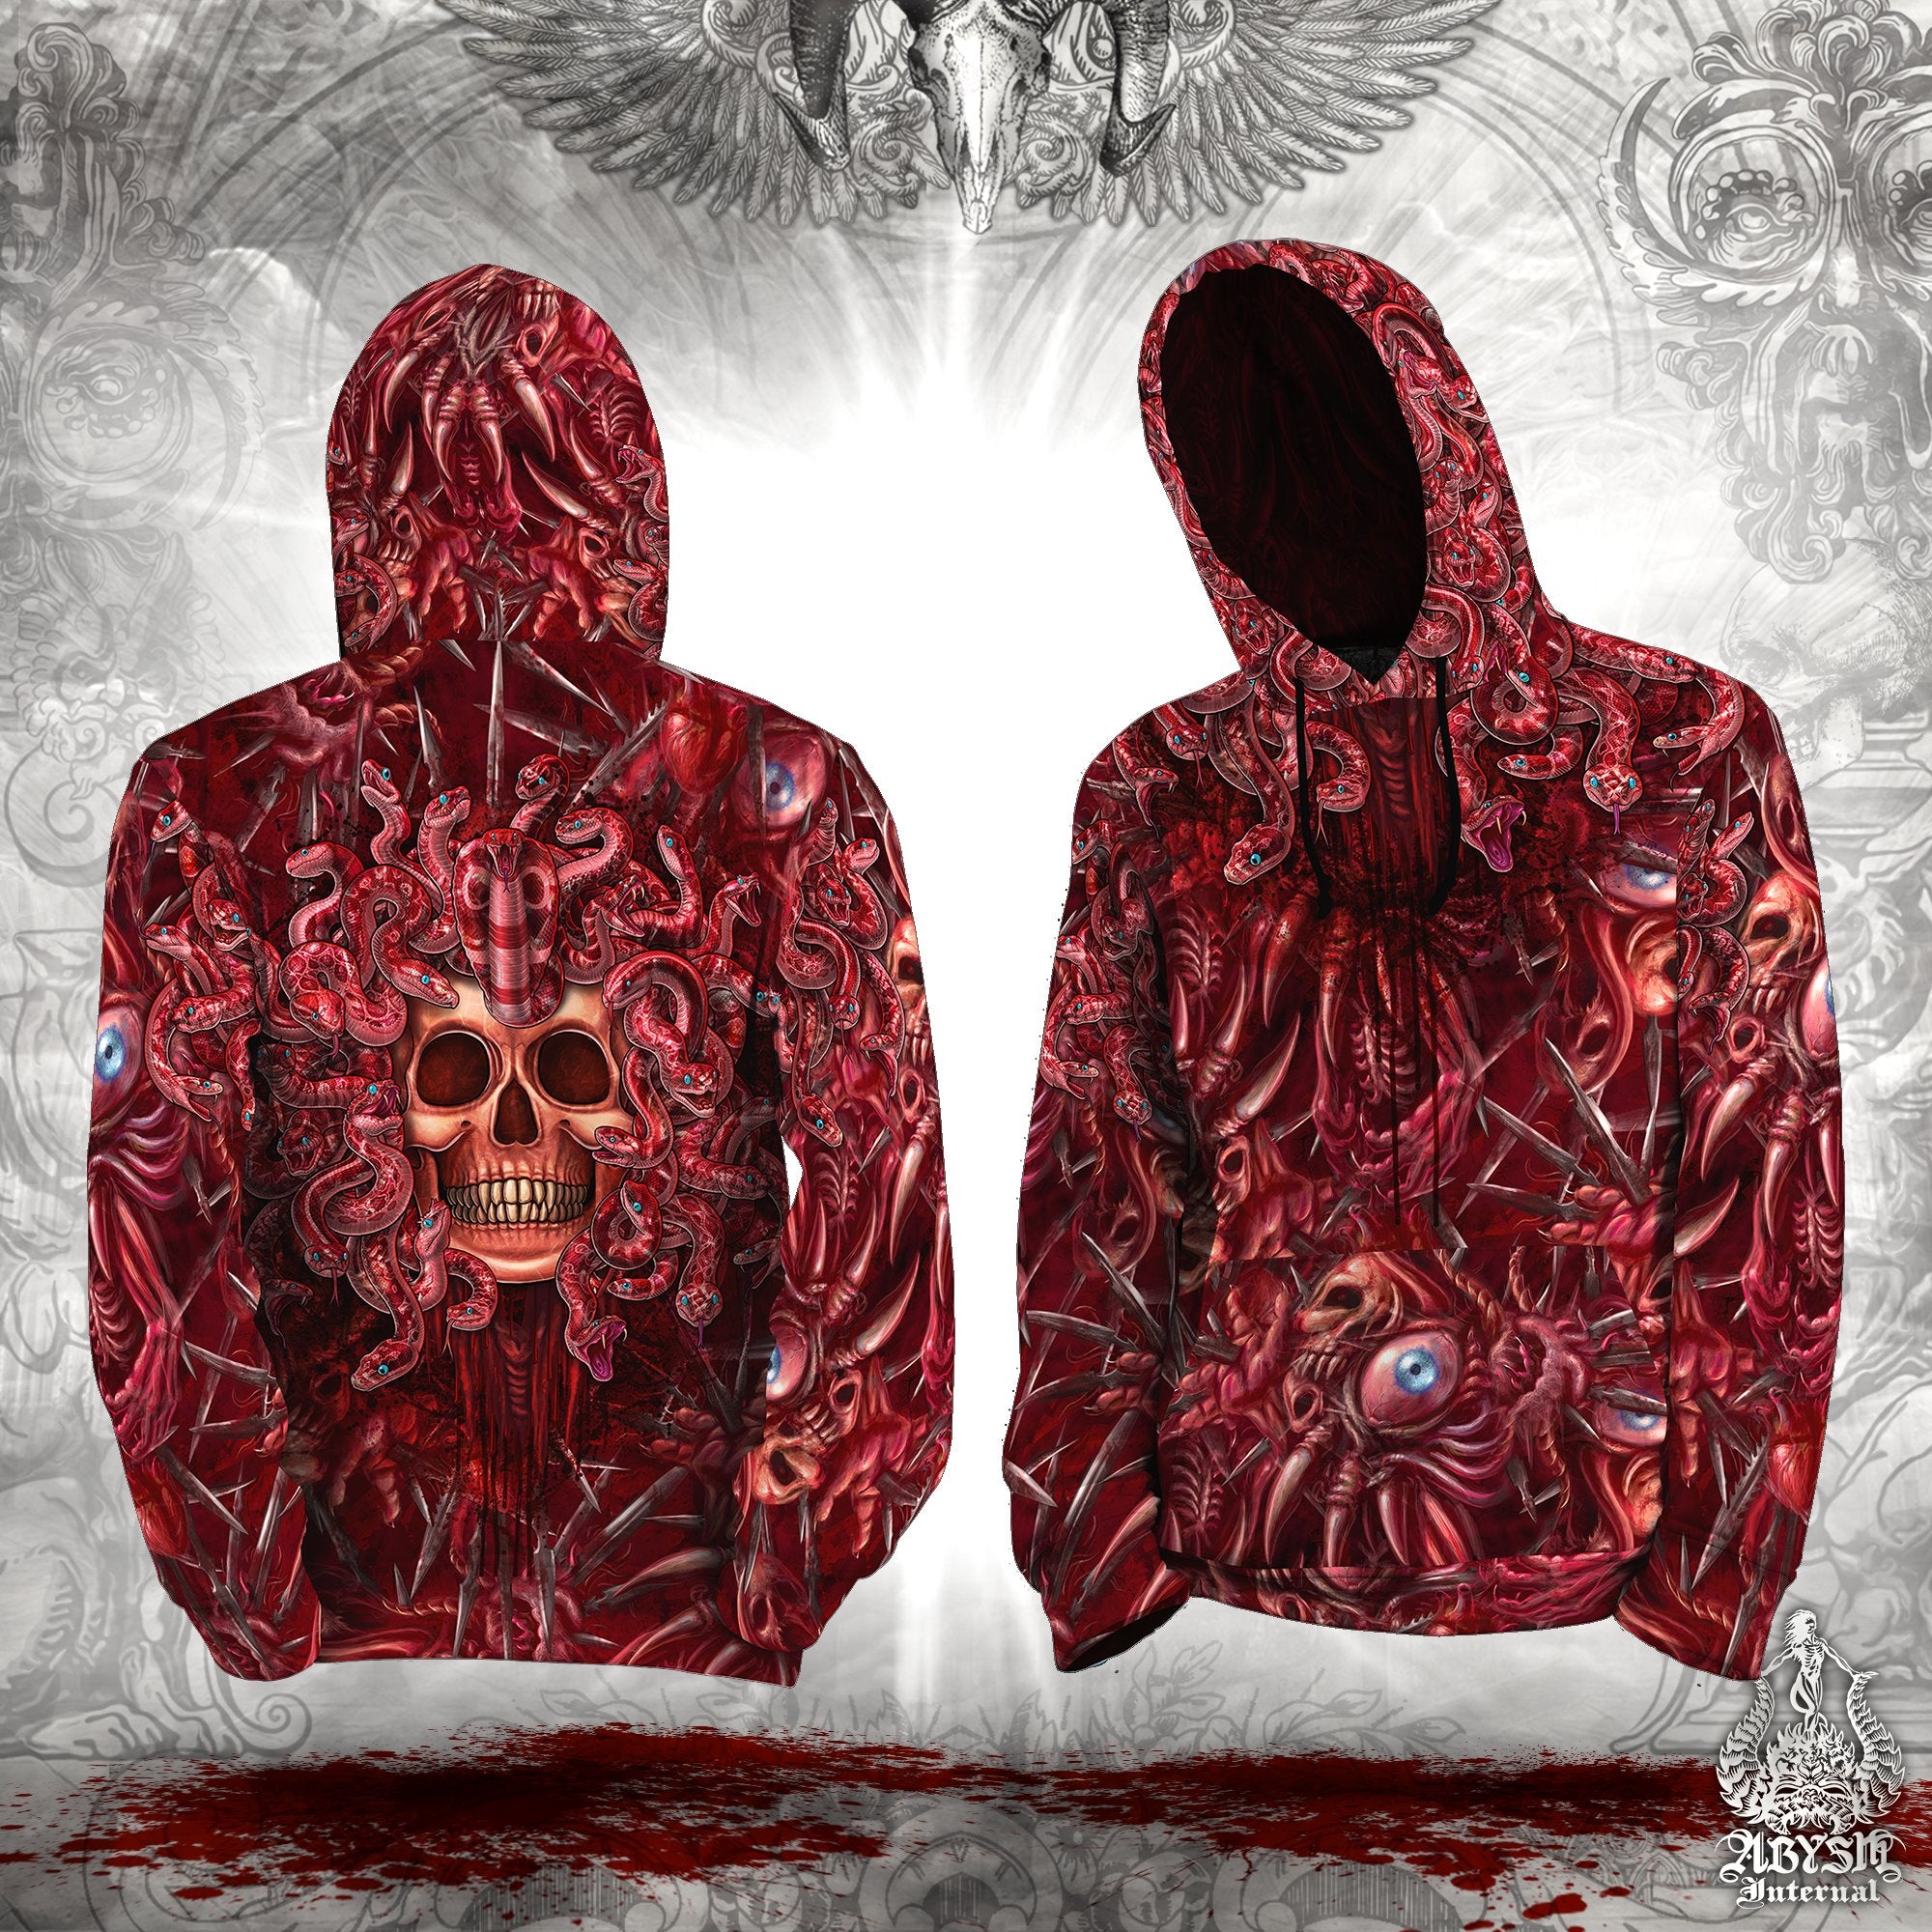 Halloween Sweater, Horror Pullover, Bloody Streetwear, Gore Hoodie, Spooky Outfit, Alternative Clothing, Unisex - Blood Medusa Skull, 2 Faces - Abysm Internal